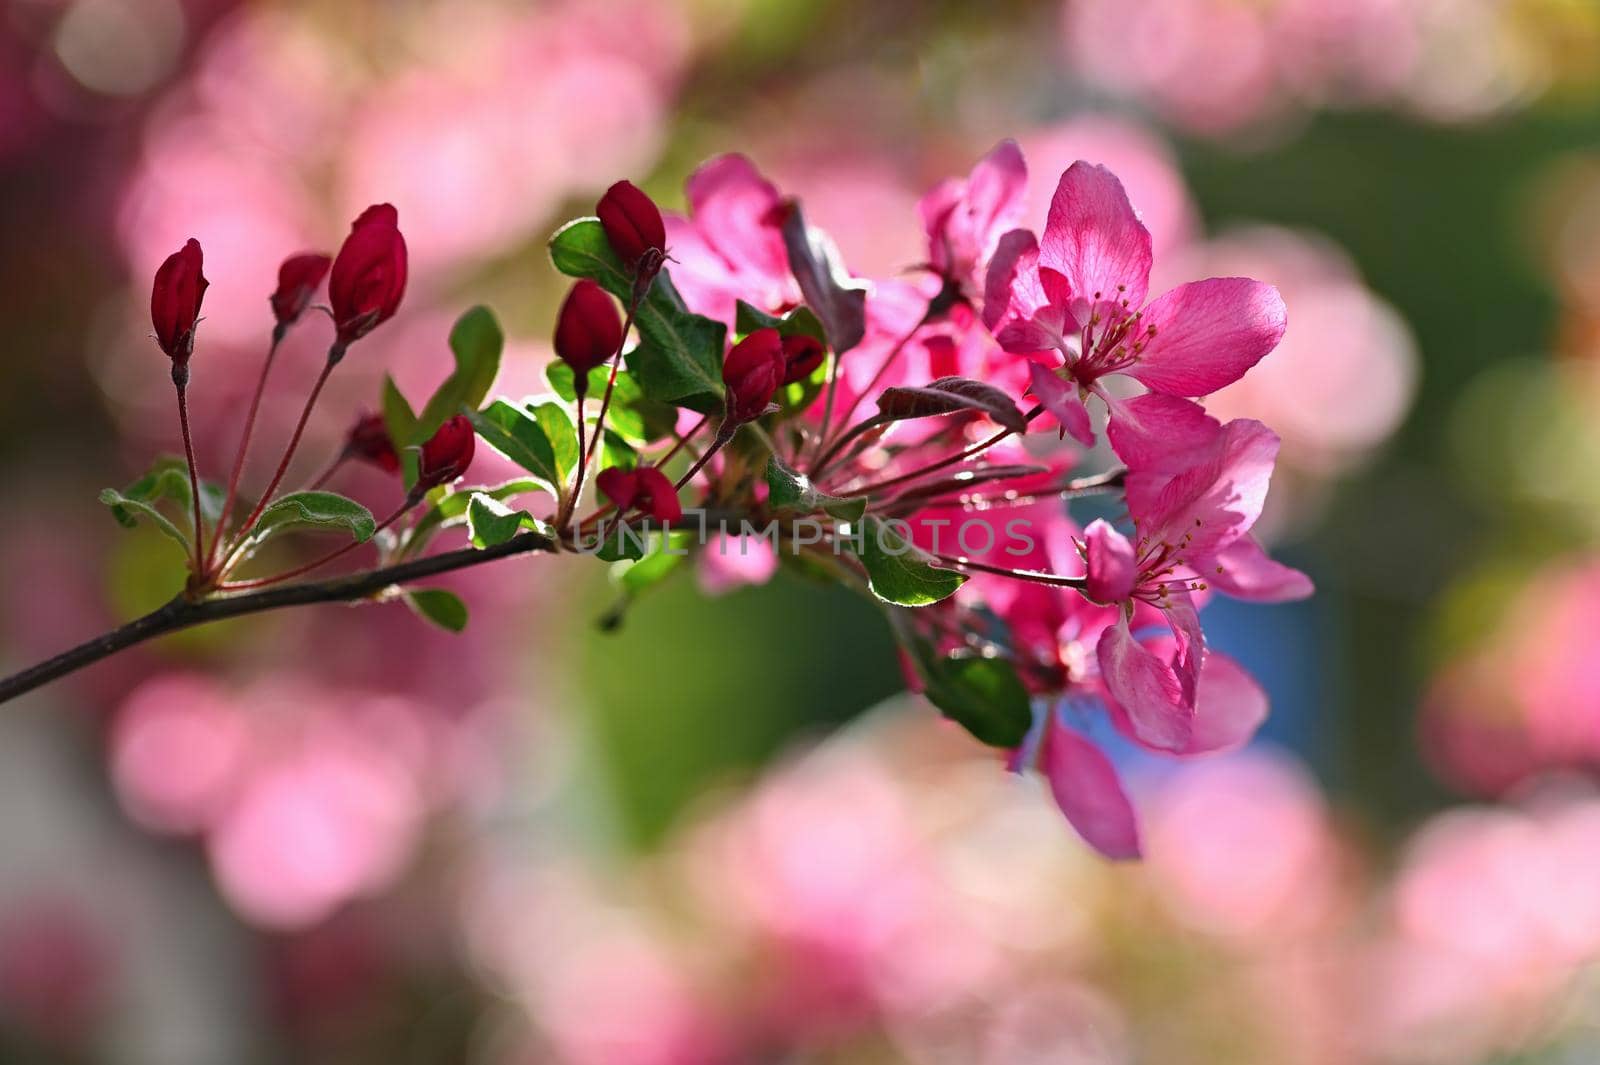 Beautiful blossom tree. Nature scene with sun in Sunny day. Spring flowers. Abstract blurred background in Springtime. 